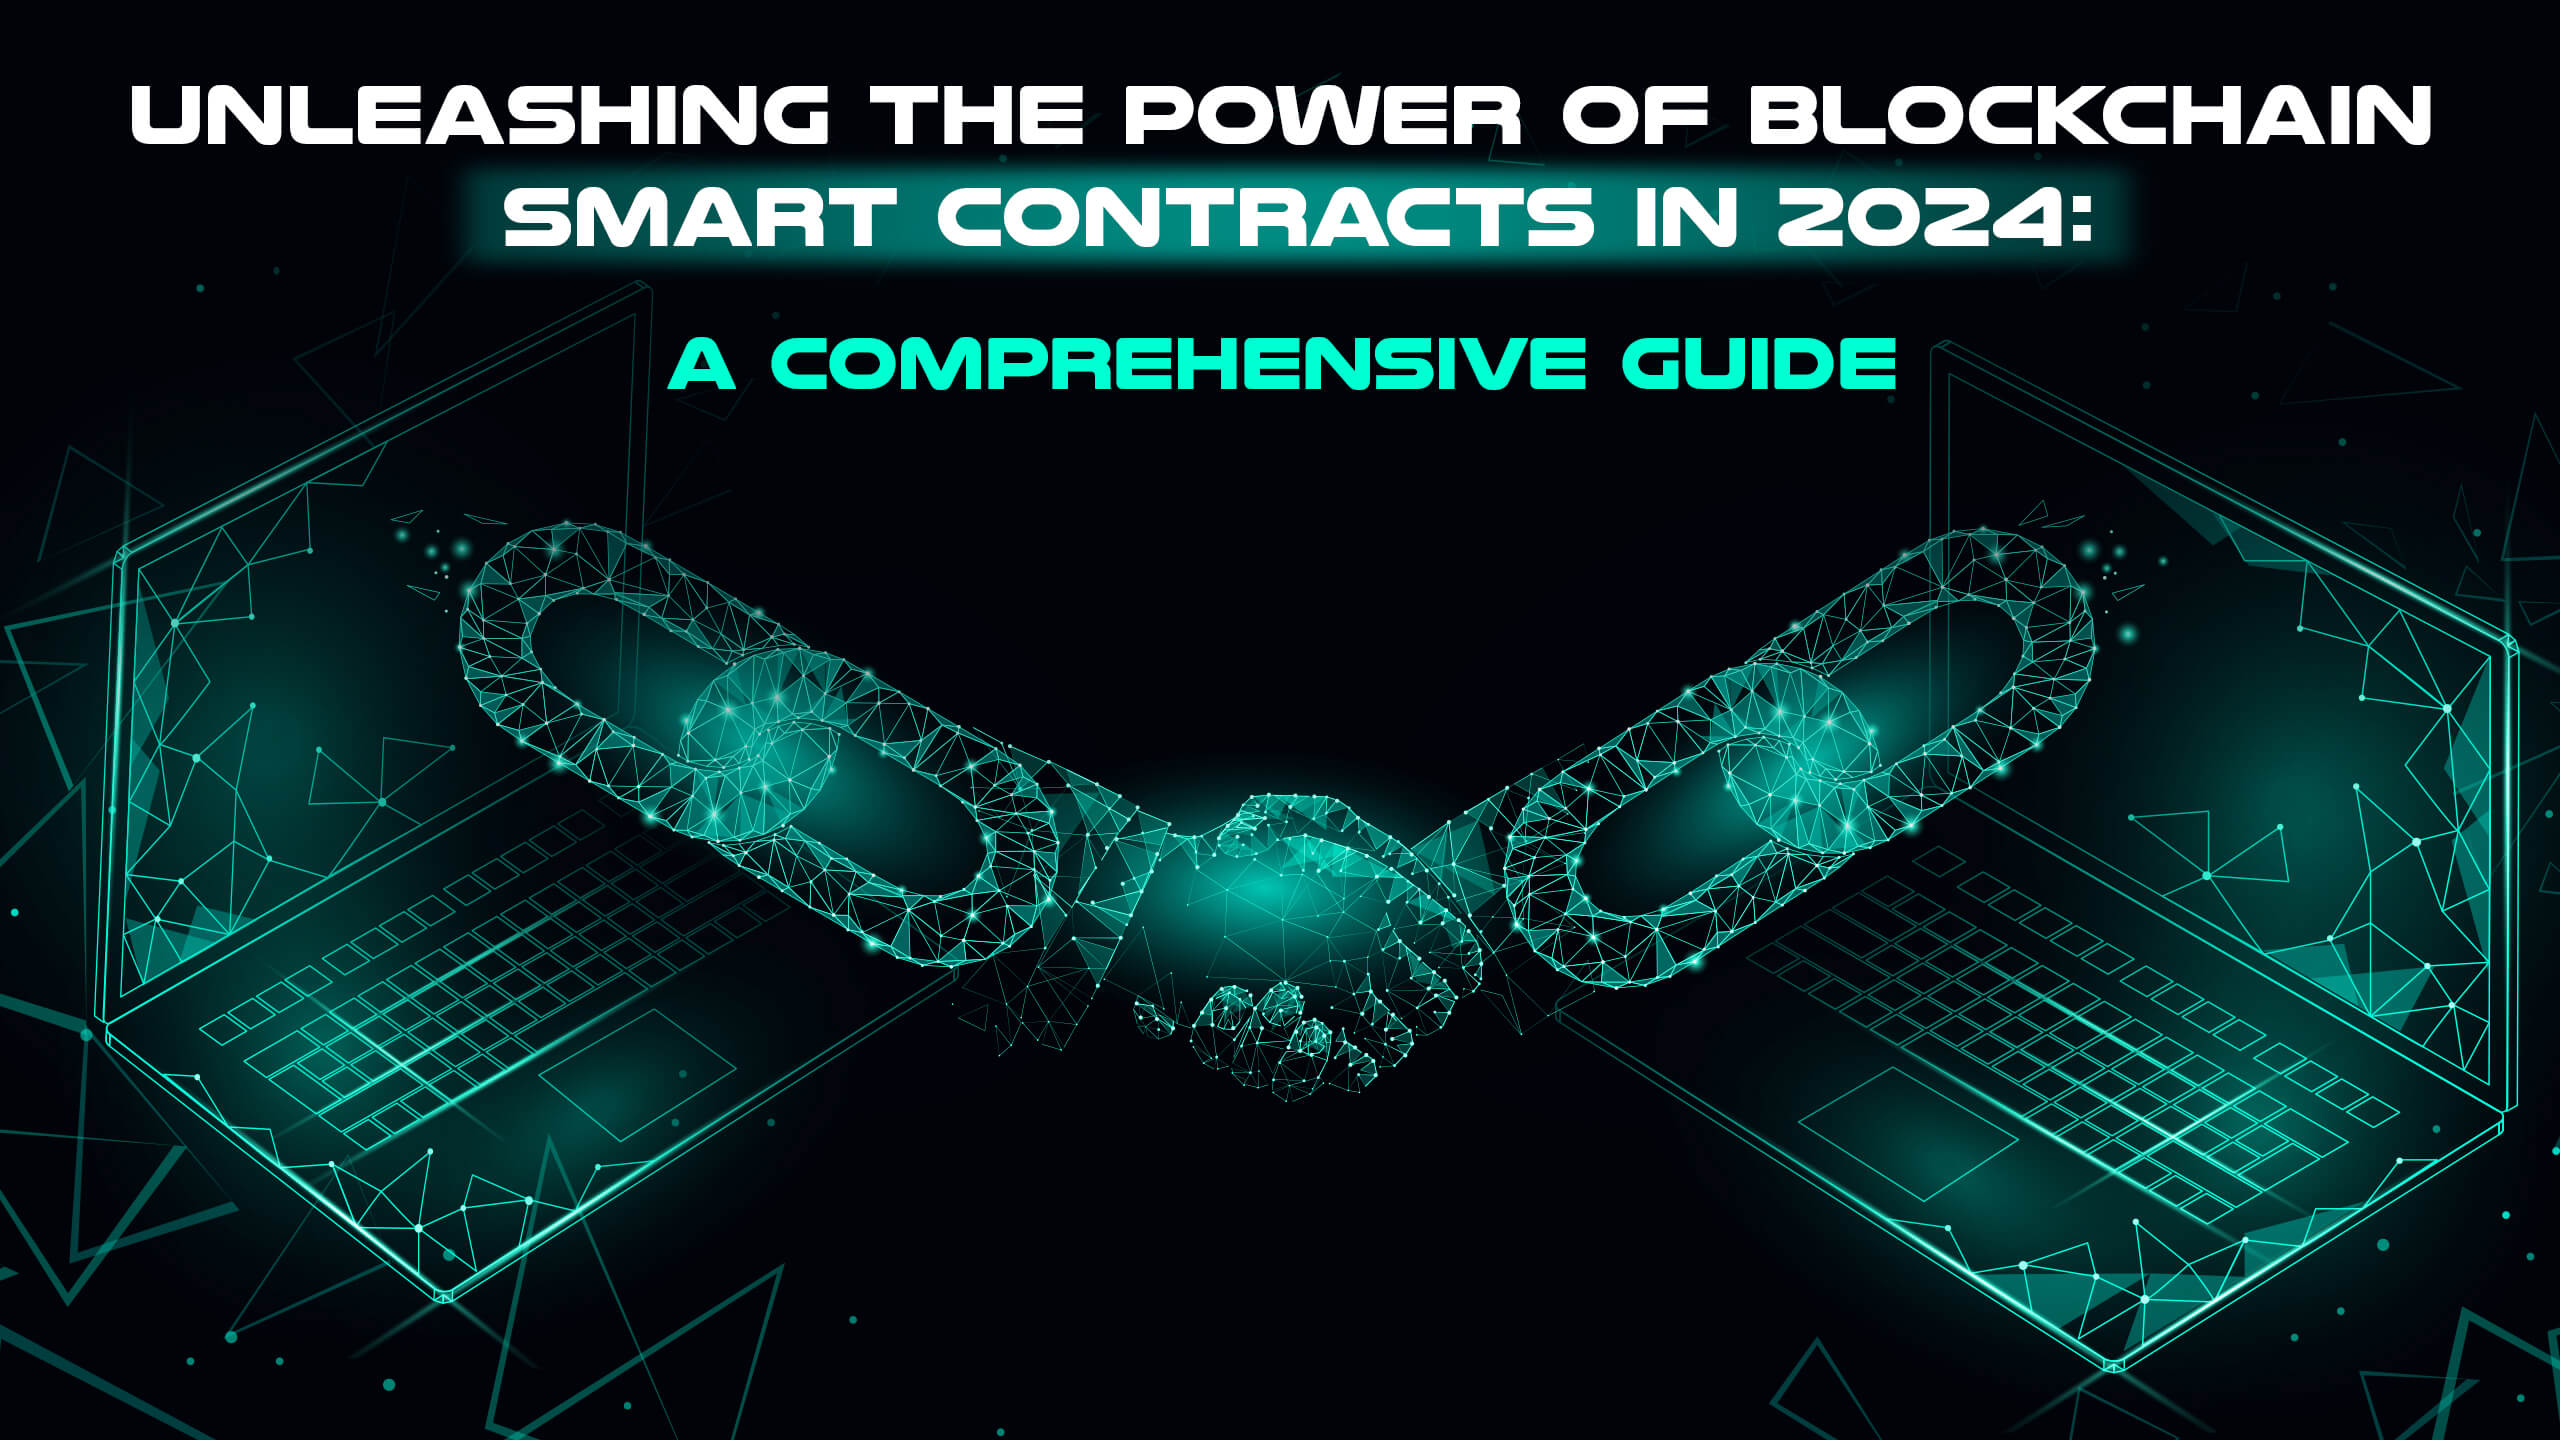 Blockchain Smart Contracts in 2024 A Comprehensive Guide